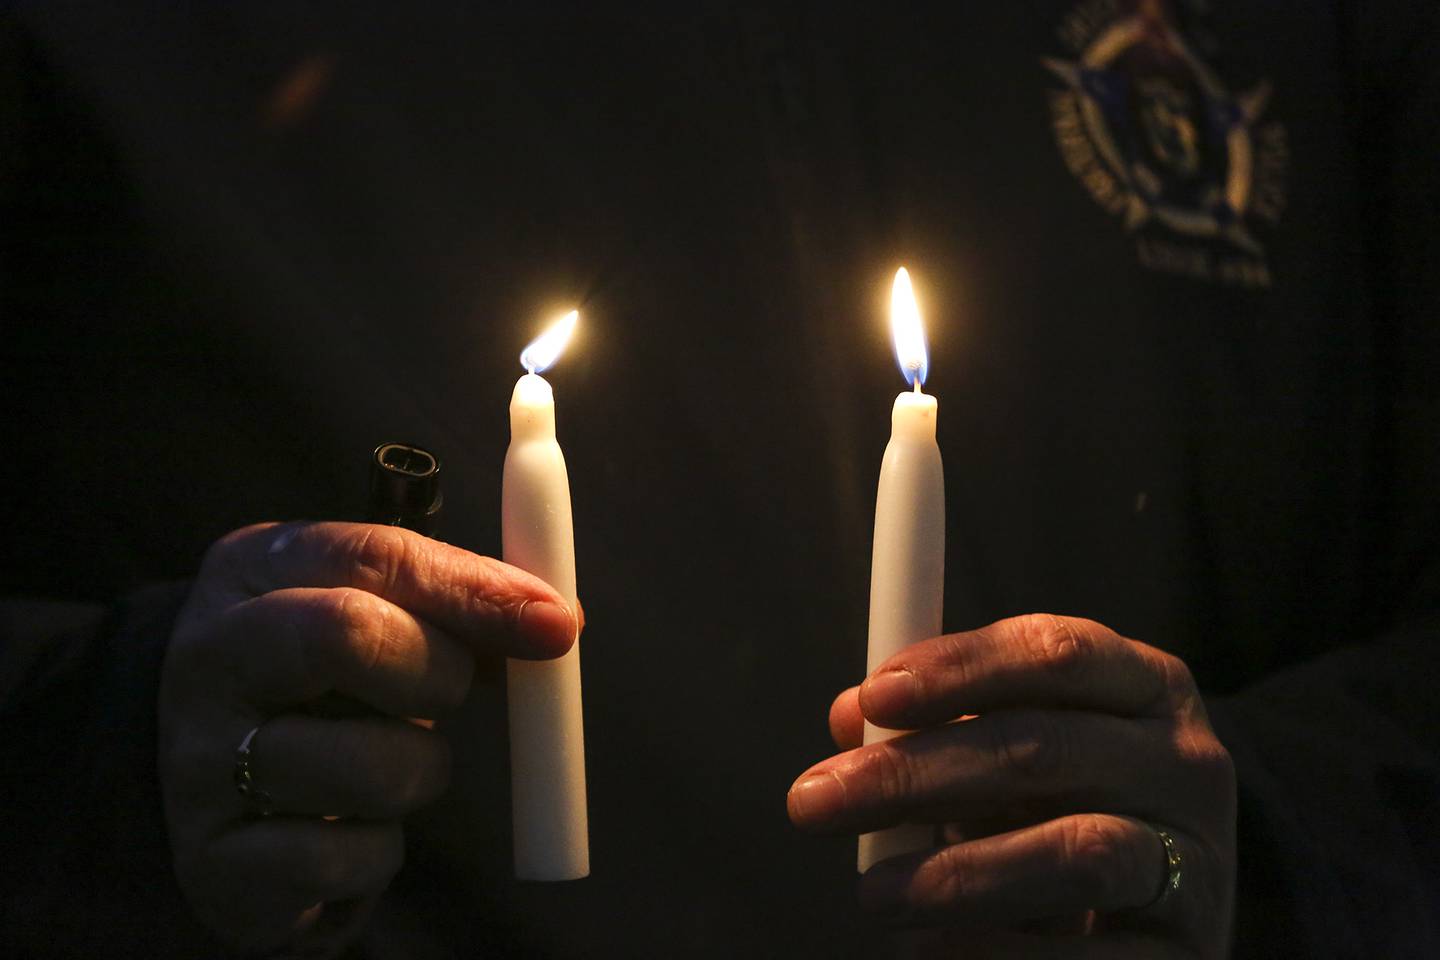 A volunteer distributes candles to vigil attendee on Tuesday, Jan. 26, 2021, at Silver Cross Hospital in New Lennox, Ill. Family, friends and coworkers attended a candlelight vigil for Deputy Ken Kostecki of the Will County Sheriffs office who is currently on a ventilator as he battles COVID-19.